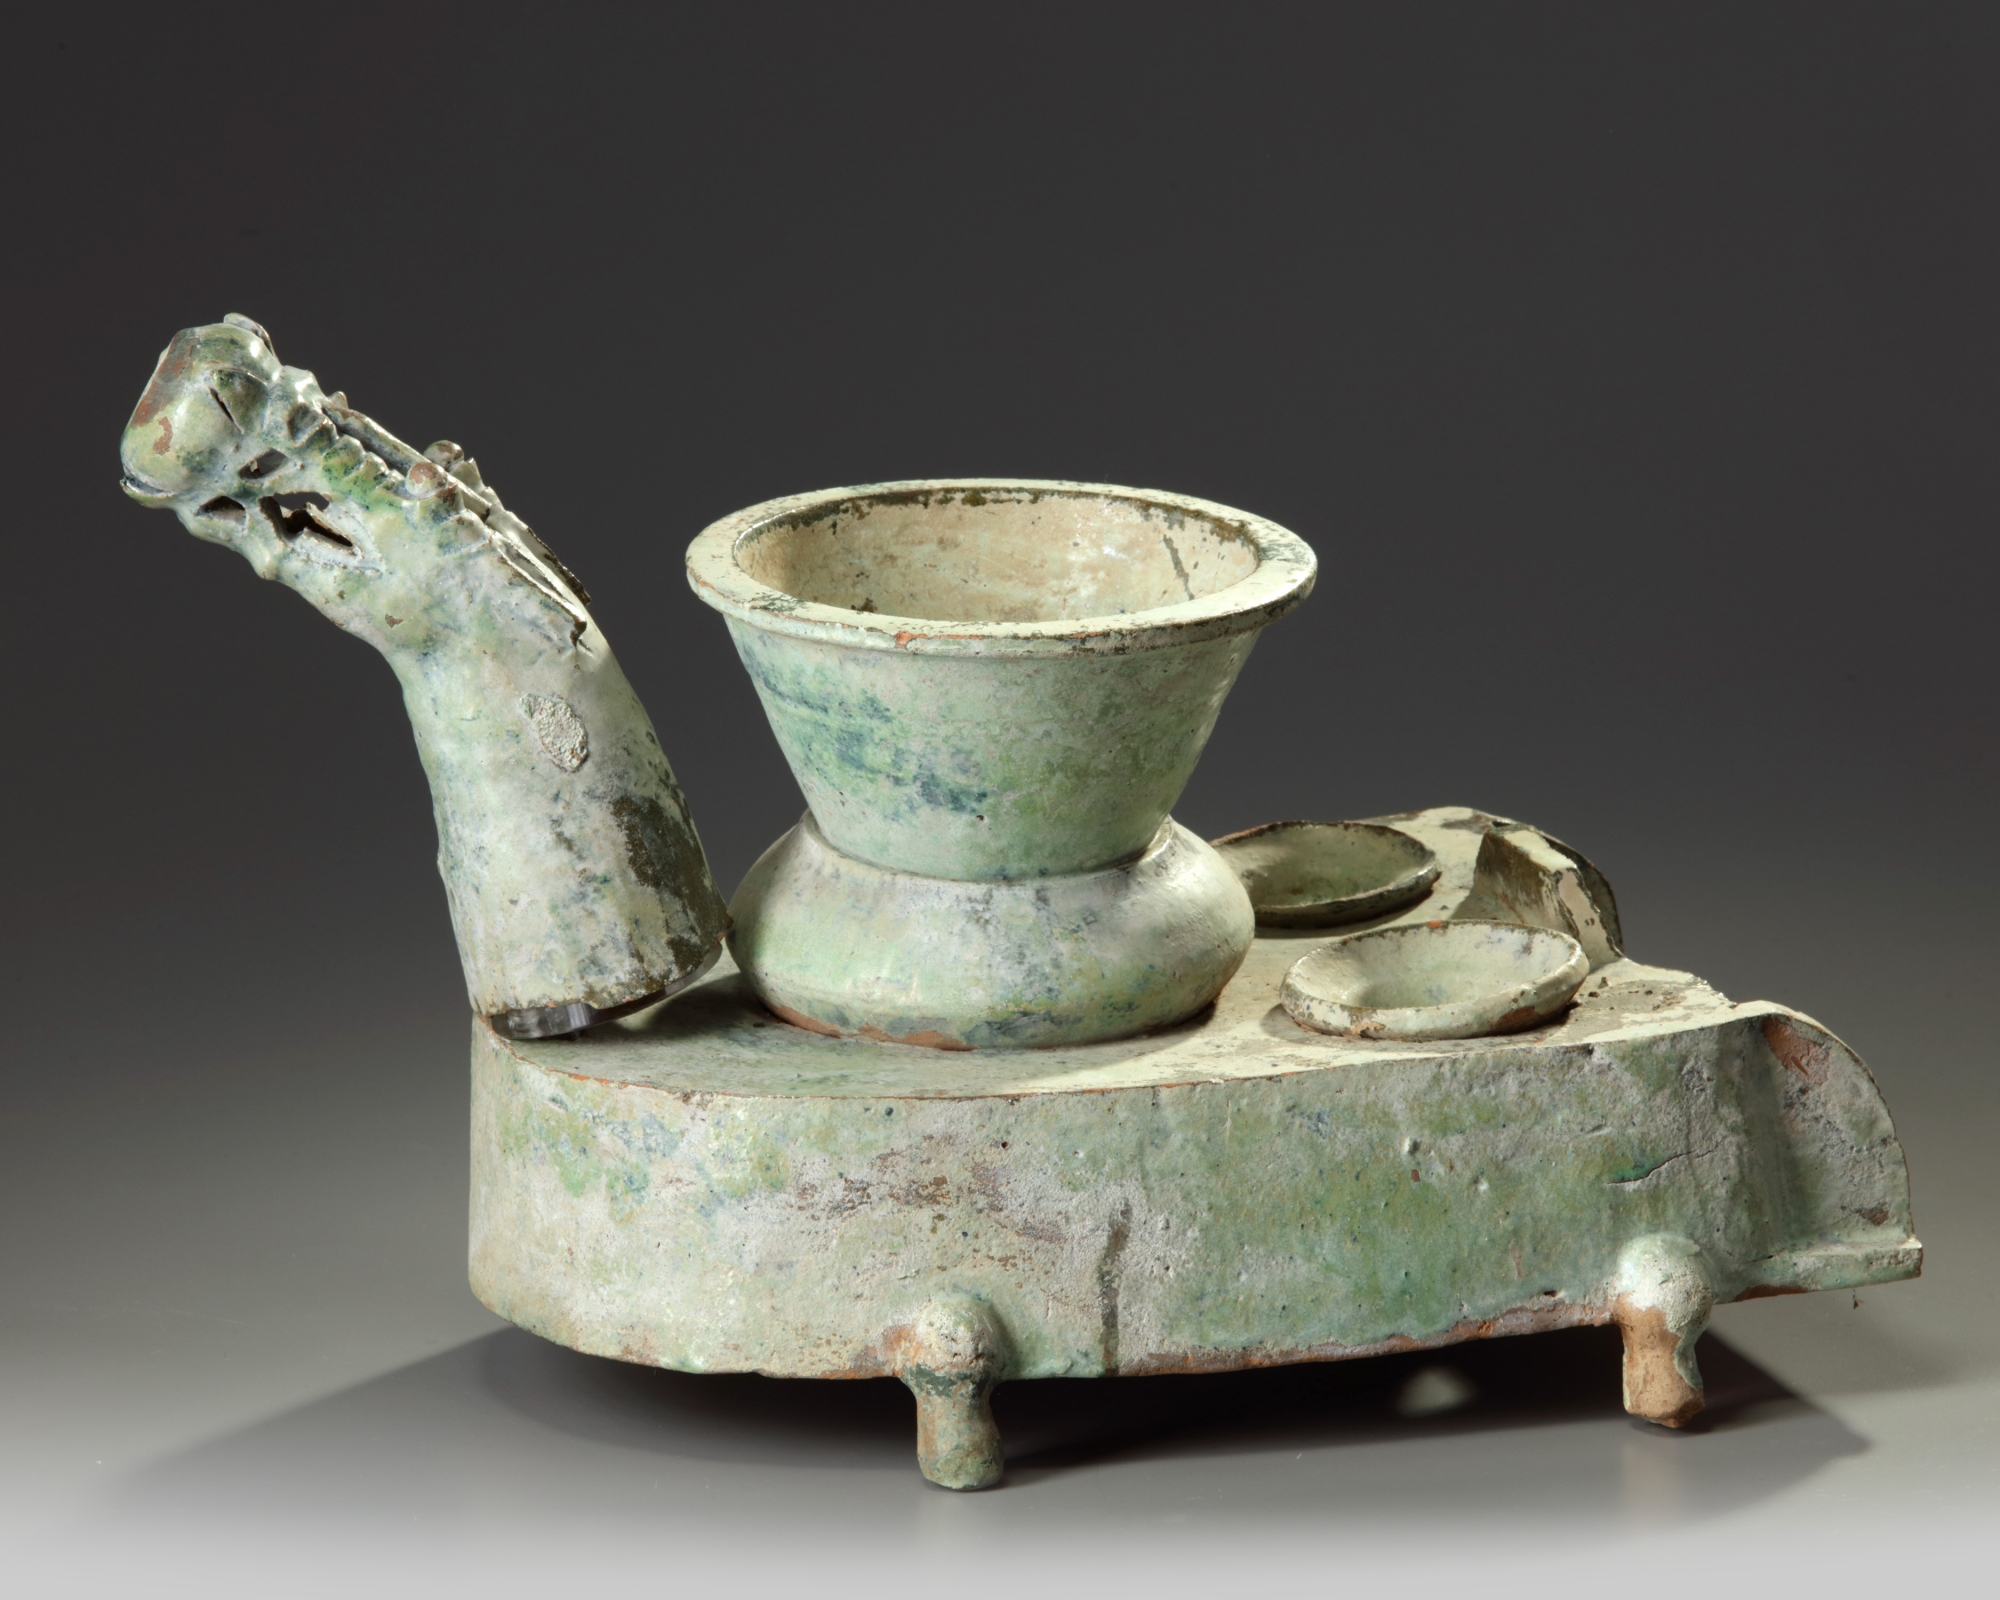 A Chinese green-glazed pottery stove with a dragon chimney - Image 3 of 8